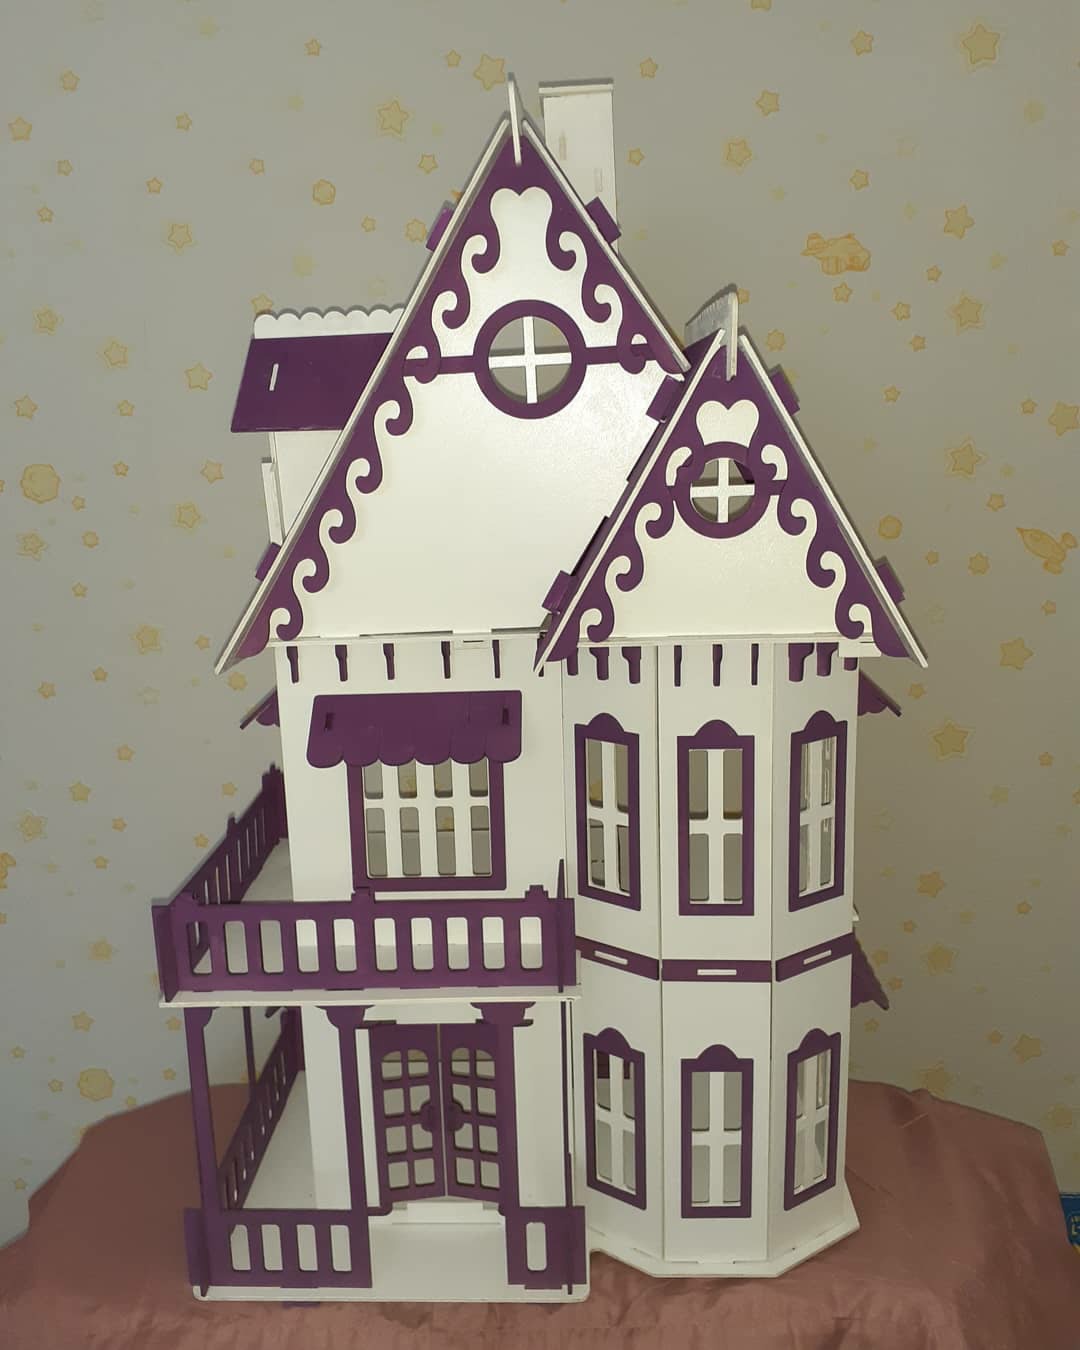 Laser Cut Wooden Toy Villa Doll House Free Vector